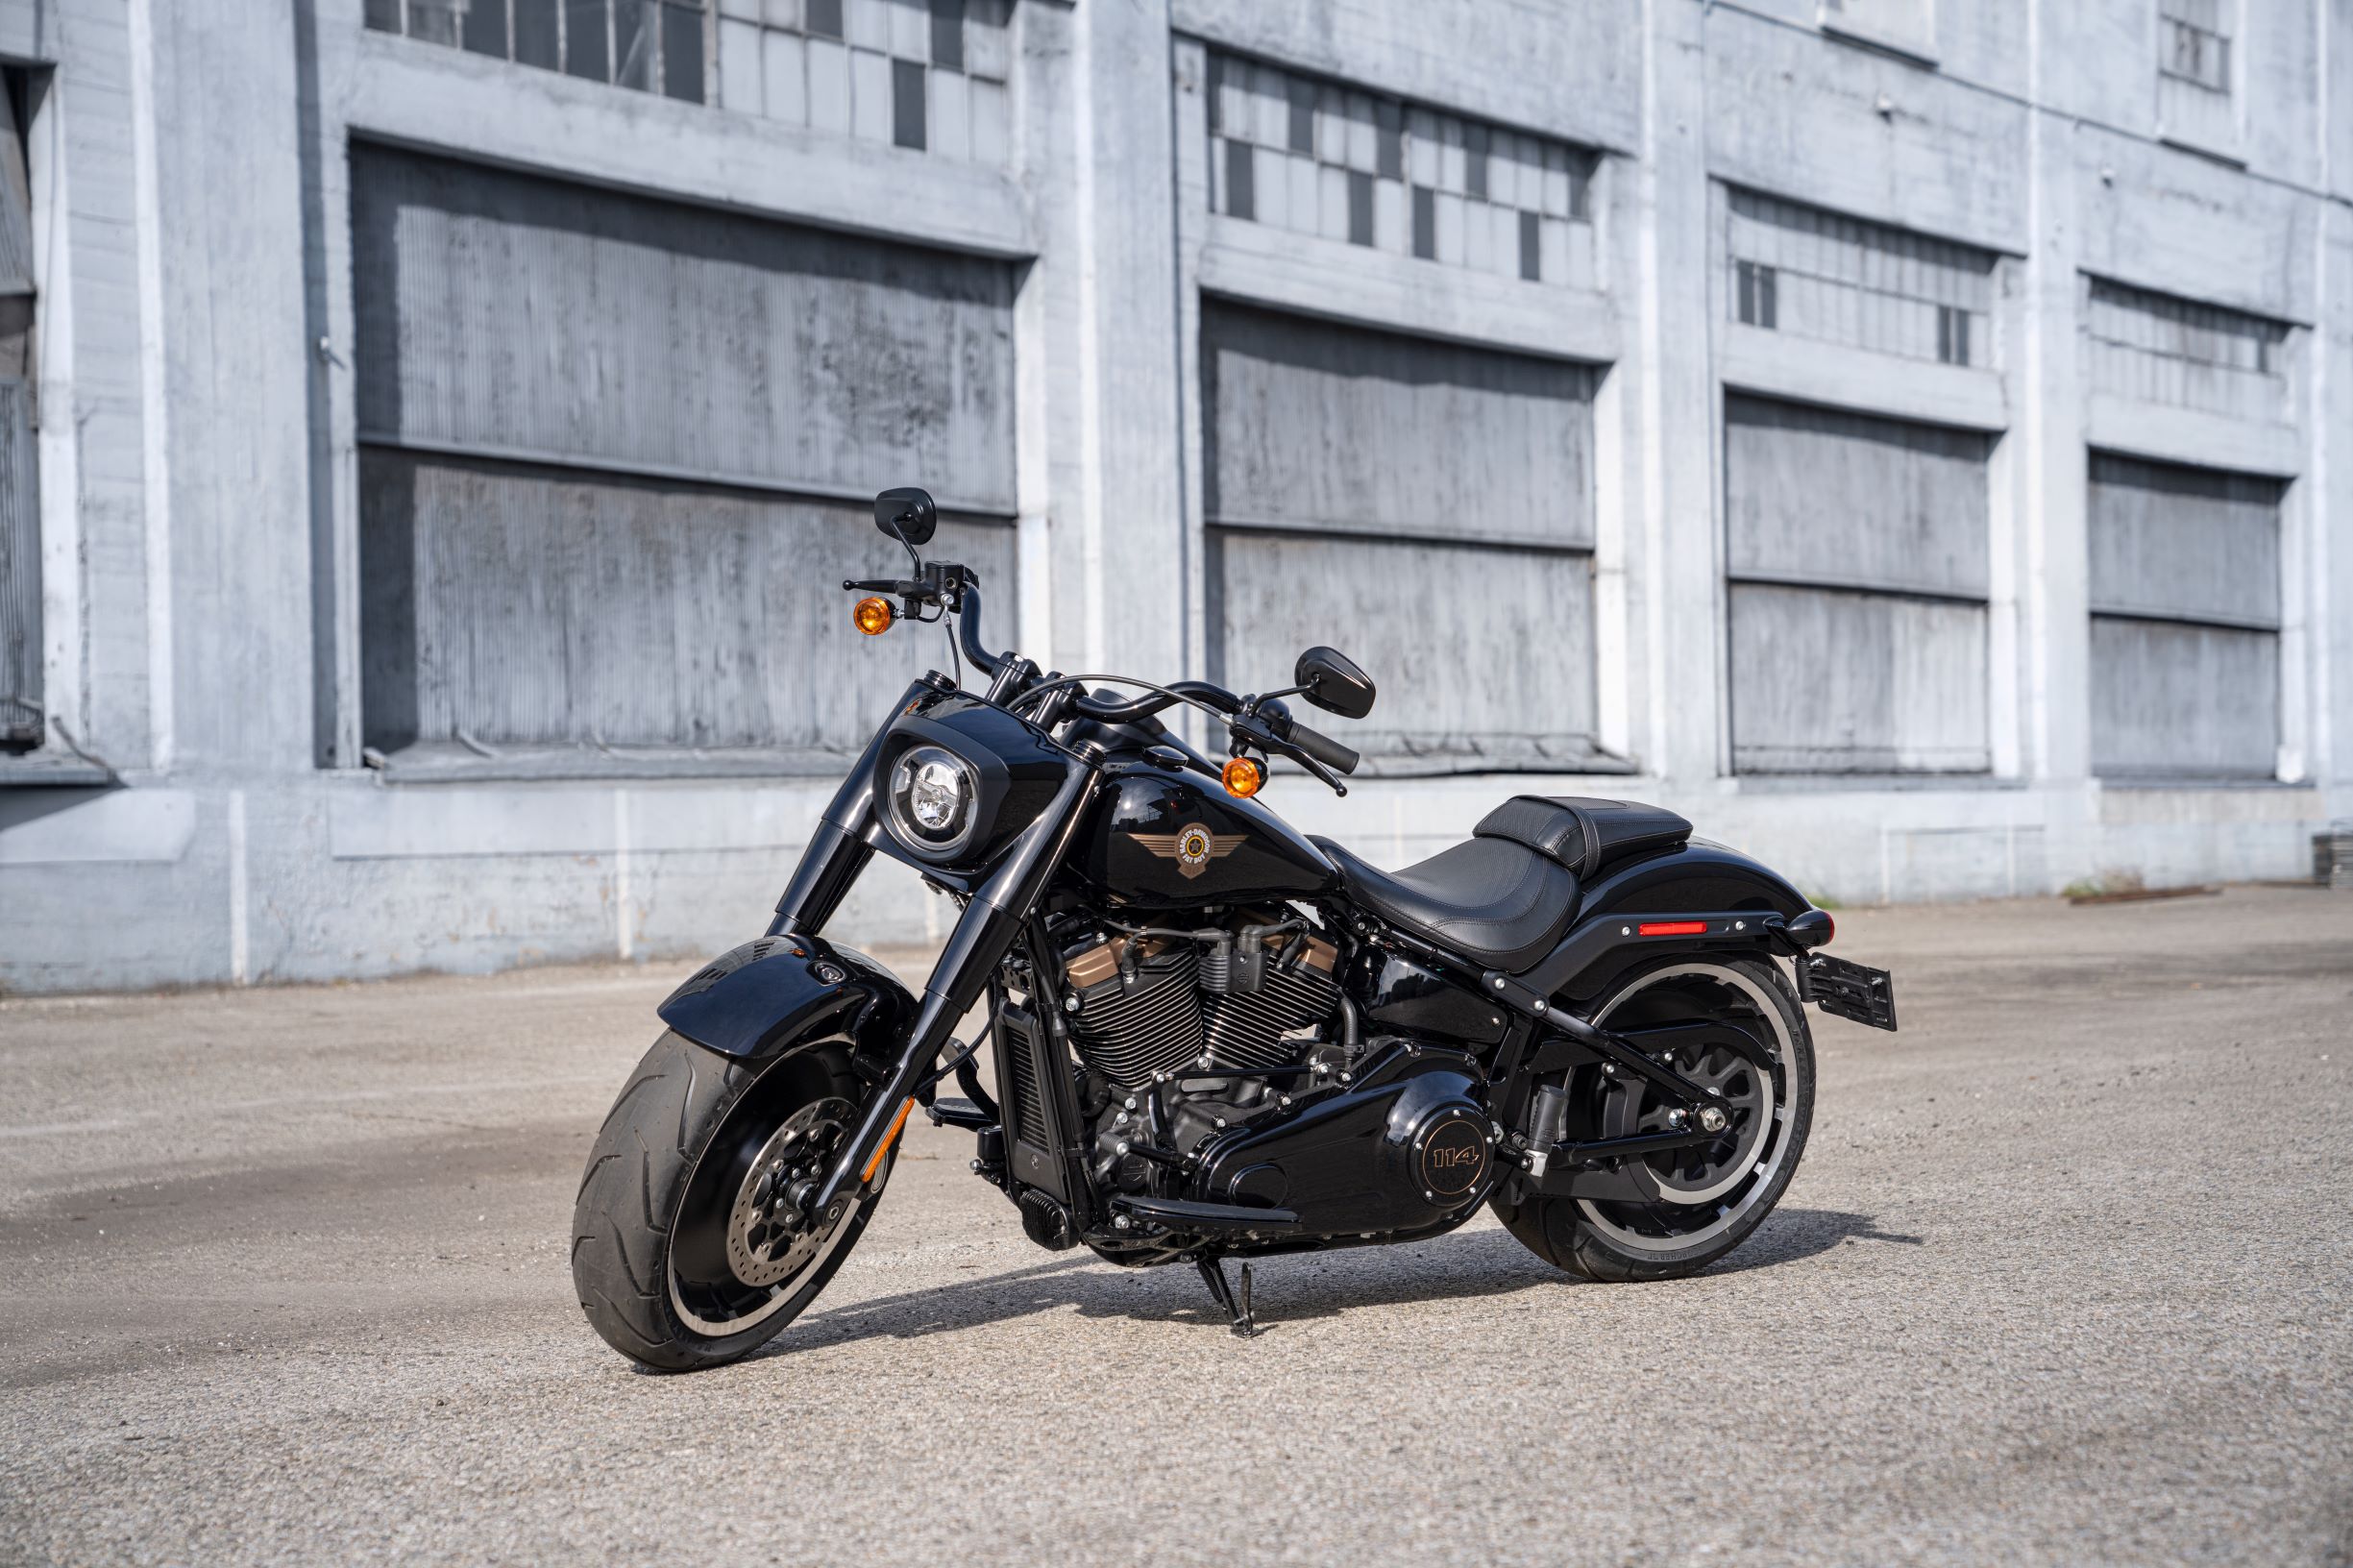 Harley Davidson Celebrates 30 Years Of Iconic Fat Boy With Special